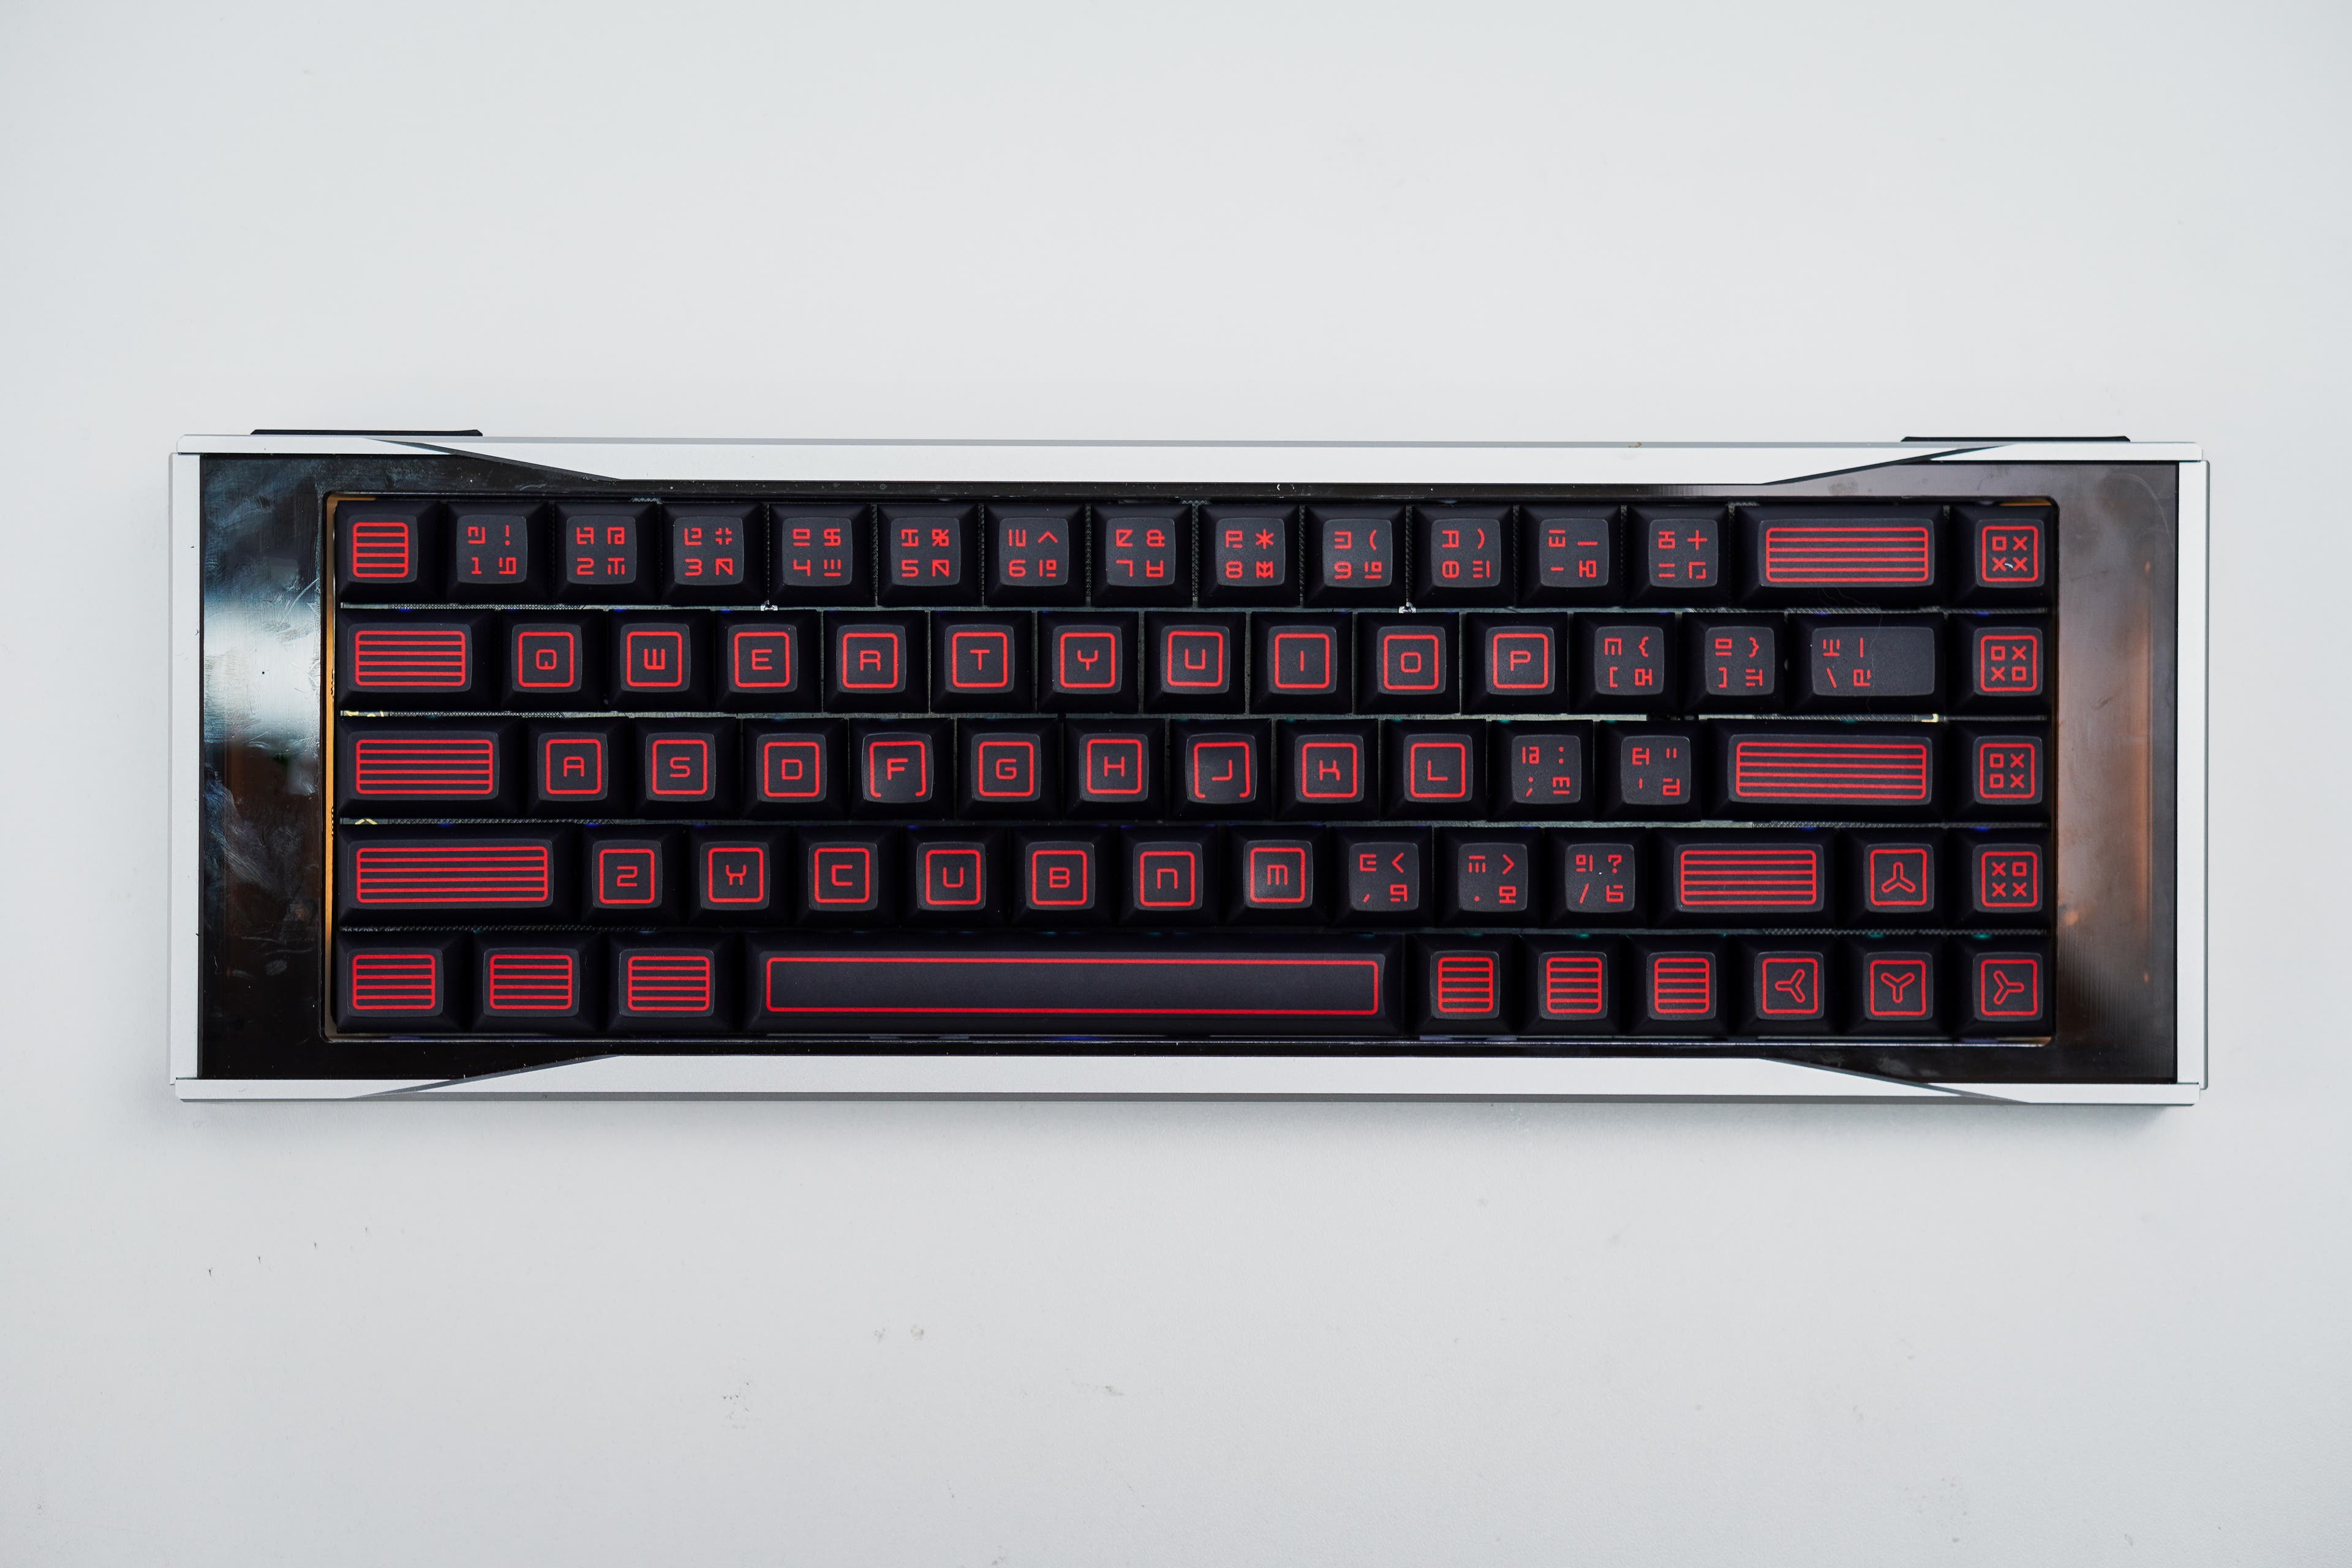 [In Stock] Lelelab Maxum 65 x KAM Command Prebuilt Ready to Use Keyboard Maxum 65 - TEA with warm white sidelights (Battery kit) + KAM Command Alphas + Modifiers / JWK Taro Bubble (+0) / Assembled